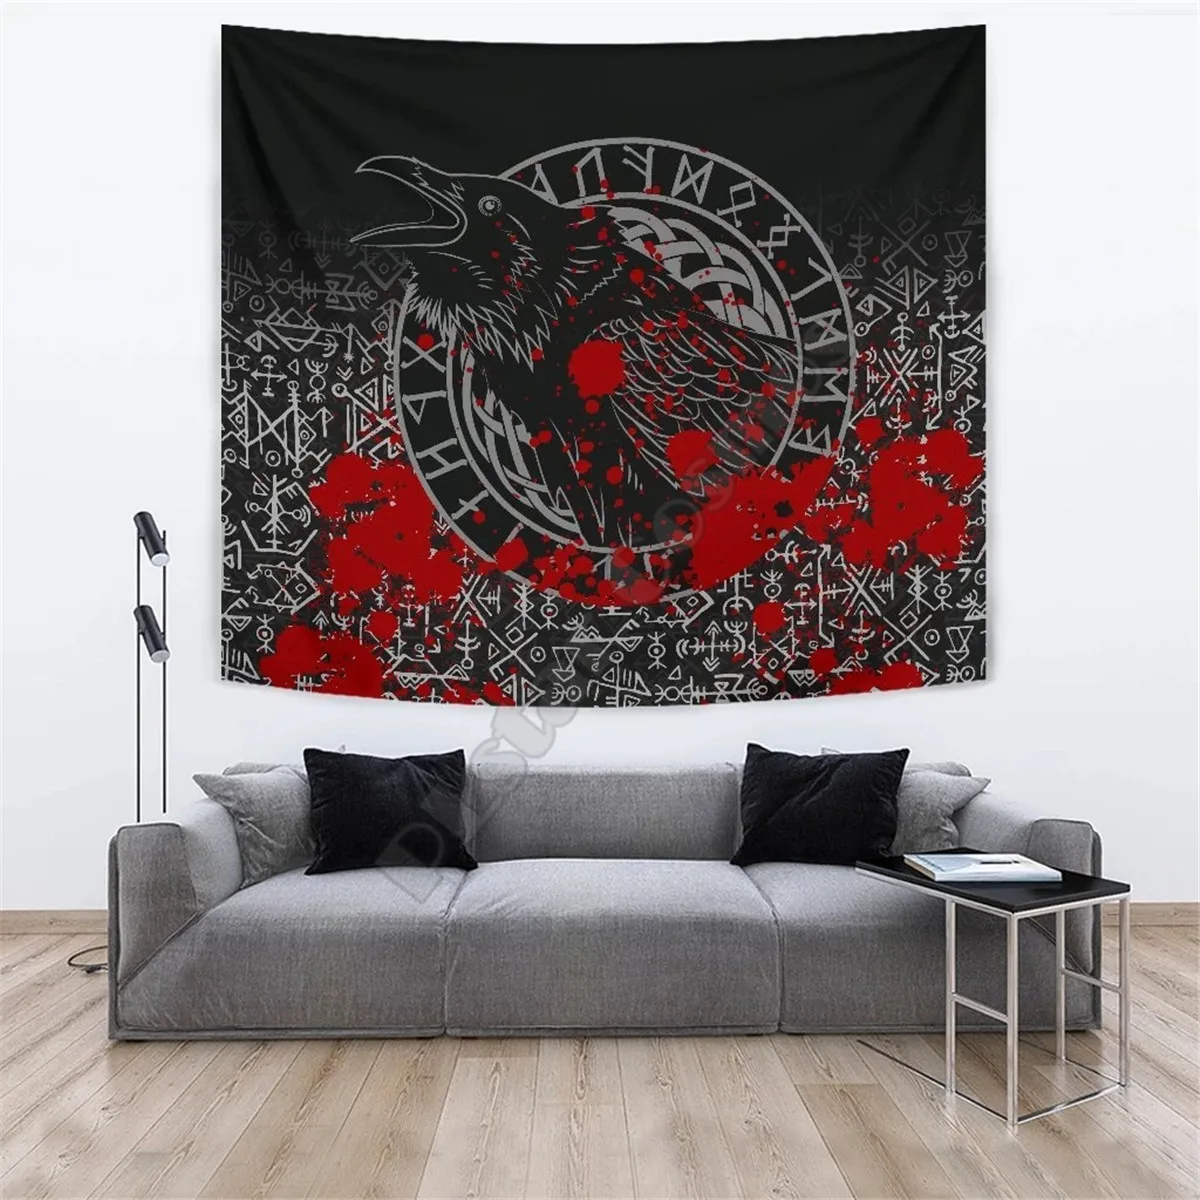 

Viking Style Tapestry Odin Raven Rune Futhark Blood 3D Printed Wall Tapestry Rectangular Home Decor Wall Hanging Home Decoration